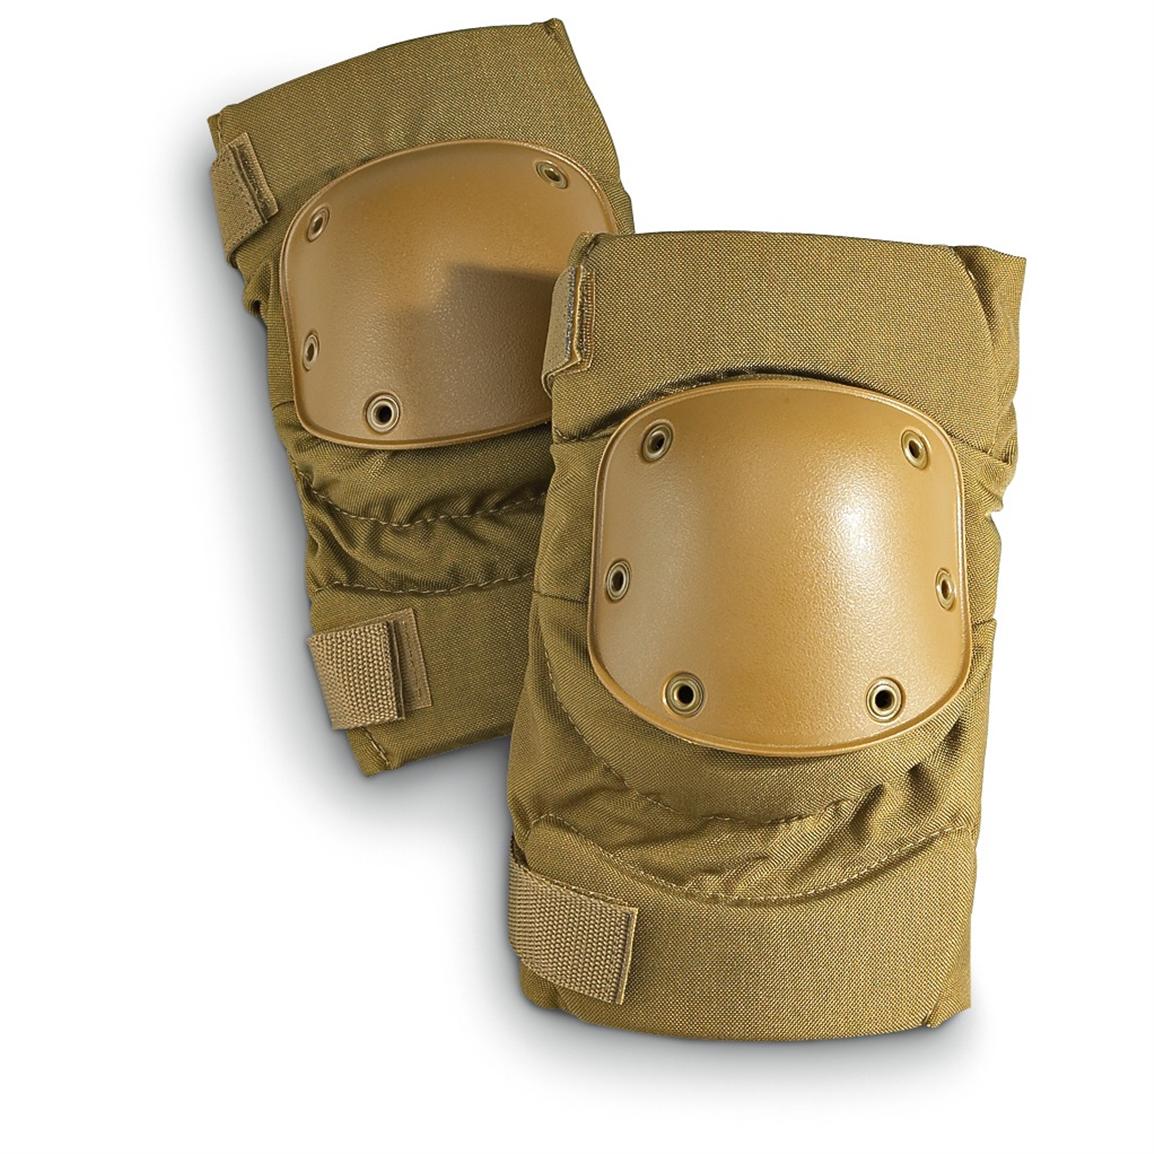 ONE NEW PAIR US Military Elbow Pads Coyote Brown Large 